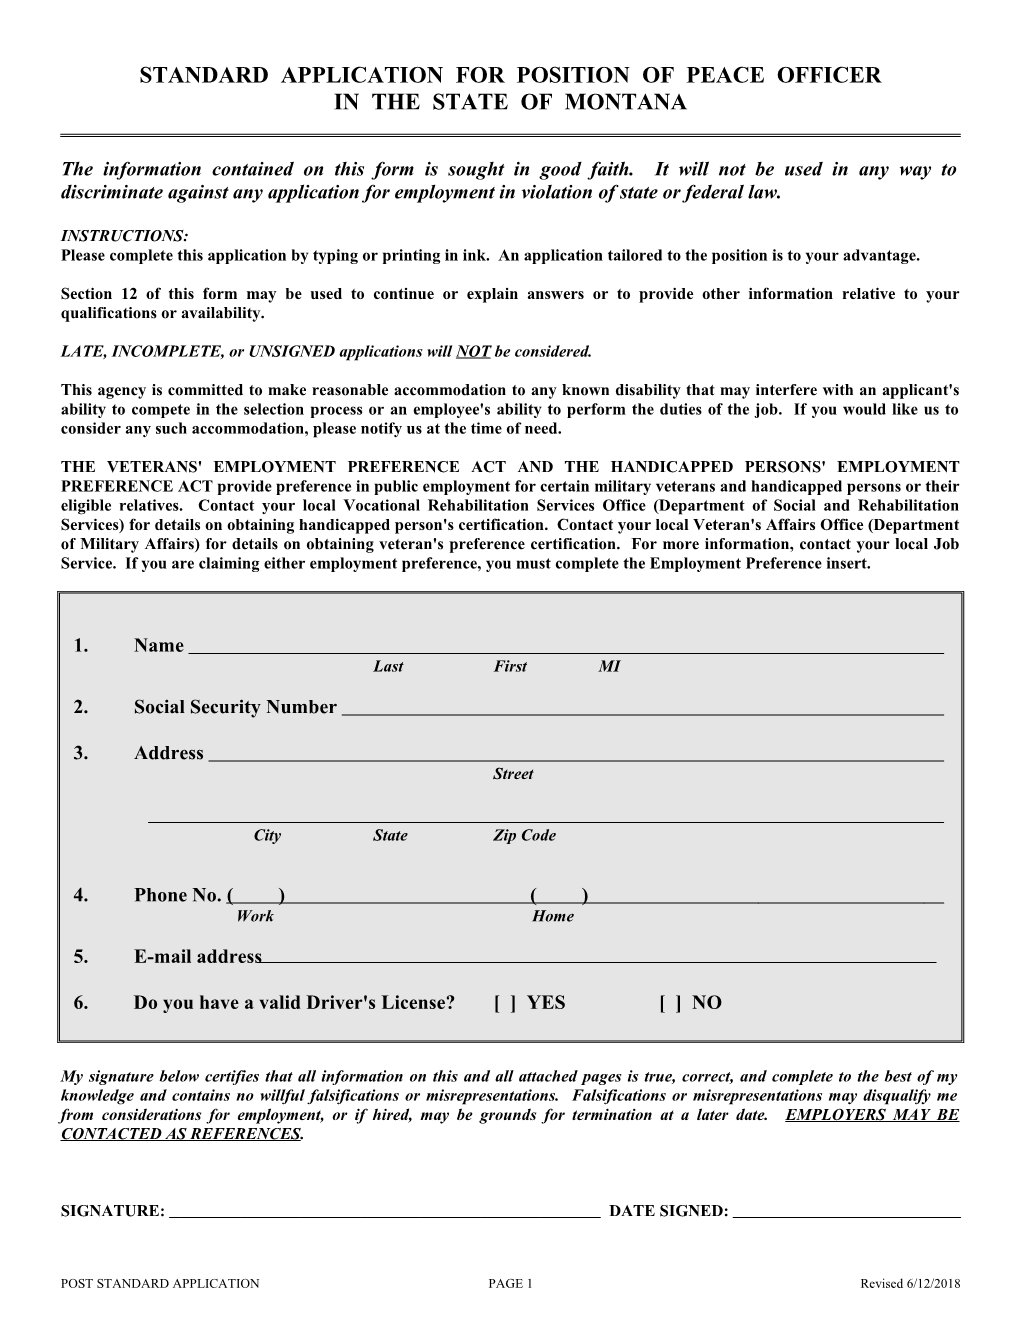 Standard Application for Position of Peace Officer